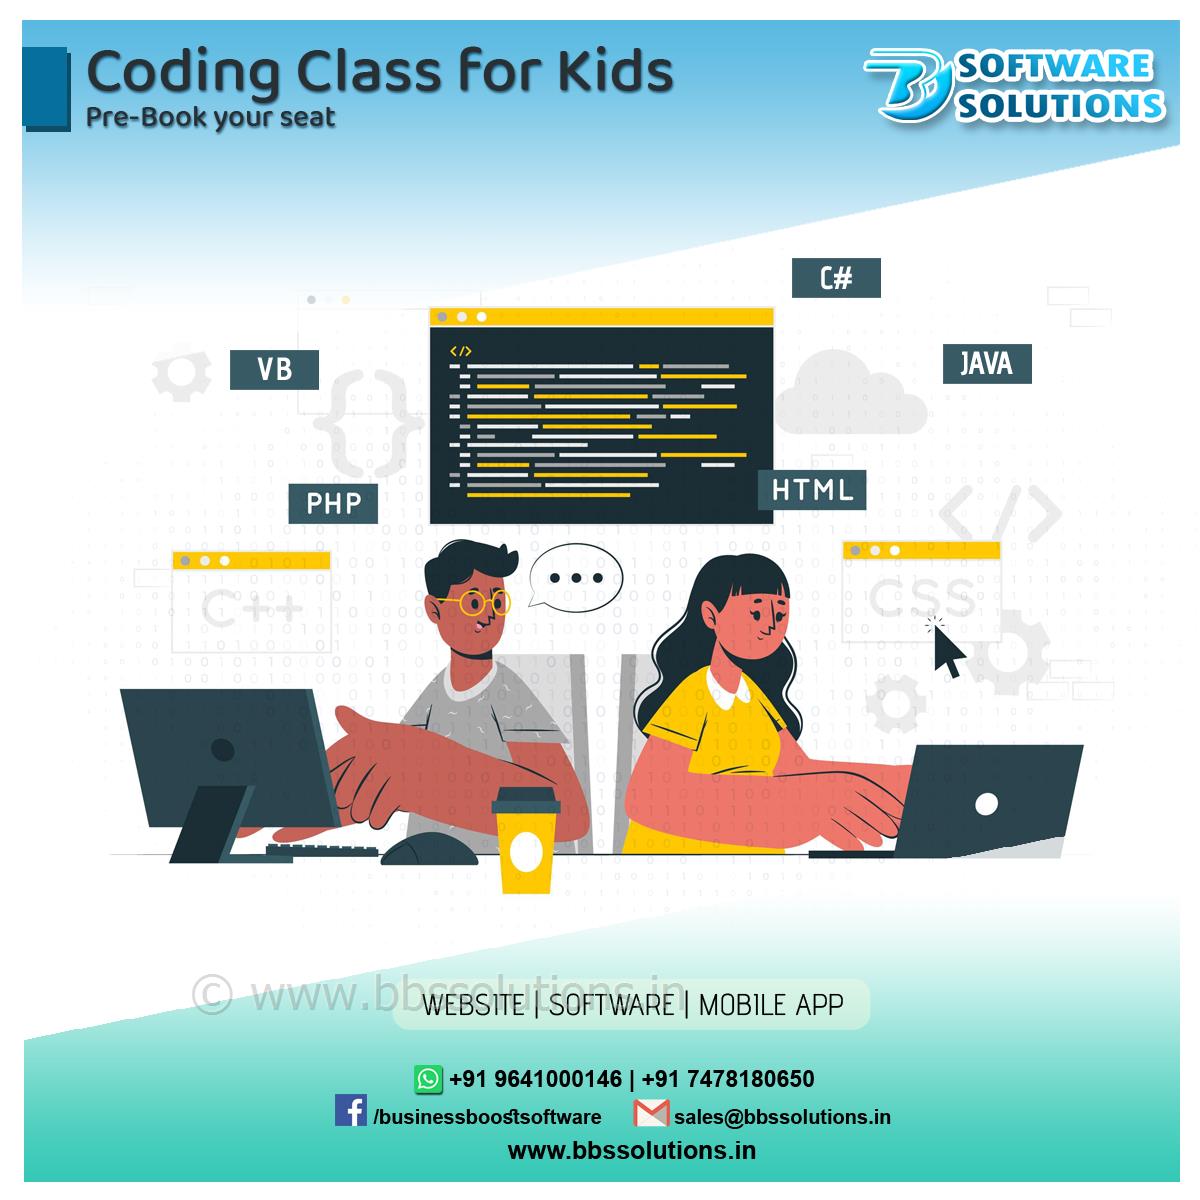 AI and Software Skill enhance education for Kids  , Business Boost Software Solutions do Best Software ,Web Development,Mobile App solutions provider in siliguri , india, WestBengal , Assam , Siliguri , Jalpaiguri ,Dhupguri,
    Best website designing in Siliguri with affordable packages and quick support. Get effective website design in Siliguri from best website designers. #bbssolutions , #SEO  , #DigitalMarketing  , #WebDesign  , #SoftwareDevelopment  , #FacebookAds  , #GoogleAds  , #GoogleSEO  , #WebsiteDesigning 
     , #Software  , #website  , #BusinessBoostSoftwareSolutions  , bbssolutions,SEO, Digital Marketing, WebDesign, Software Development, Facebook Ads, Google Ads, Google SEO, Website Designing, 
    Software, website, Business Boost Software Solutions, 9641000146,7478180650,best GST software in West bengal,Best GST software company in north bengal,GST solution in west bengal
    ,gst solutions in north bengal,best customize software in siliguri , india,best customize software in west bengal,best customize software in dhupguri,news portal website in west bengal
    ,news portal website in siliguri , india,regional news portal website in siliguri , india,school software in west bengal,school software in north bengal,school website in north bengal,
    school software in north bengal,android app, ios app, ecommerce website, ecommerce software,Web designing, website designing, ecommerce website, how to make website, create website, 
    website development company, web page design, seo, search engine optimization, seo siliguri , india , 
    seo company, best seo company, seo services, responsive web design, web designing companies, 
    how to create a website, internet marketing, digital marketing, online marketing, social media marketing, 
    promotion,web designing in Siliguri,web designing in Siliguri siliguri , india,web designing in siliguri , india,GST Software  ,  GST Billing Software  ,  GST Accounting  ,  GST Ready Software,
    software company in siliguri,software company in siliguri siliguri , india,software company in north east siliguri , india,
    school software in siliguri,school software in north east siliguri , india,customize software,free software demo,
    reasonable price software,cost effective software,resonable price software,free demo software,free software,best software support,free software support,best software company in siliguri , india,
    best software company in siliguri,MLM Software company in Siliguri,Binary Software company in Siliguri,
    top ten software company in north bengal,top ten software company in siliguri,top ten software company in siliguri , india,
    top ten software company in north east,software development siliguri , india,west bengal,kolkata,siliguri , software company in siliguri , india
     , software development west bengal , Customized software siliguri , india , software for hotel,medicine distributors,
    jewellery shop , best software company in siliguri,jalpaiguri,sikkim,darjeeling  , Business Boost Softwate Solutions  ,  
    Web designing company in siliguri  ,  ecommerce designing company in siliguri  ,  web development company in siliguri  ,  
    software development comapny in siliguri  ,  software development in sikkim  ,  website designing company in sikkim  ,  
    SEO service in sikkim  ,  web designing company in siliguri  ,  web designing compnay in North Bengal  ,  
    SEO service in siliguri  ,  web designing in north bengal  ,  web designing in north east siliguri , india , website designing in siliguri, best website designing in siliguri, web design, web designer in siliguri, web designing company siliguri